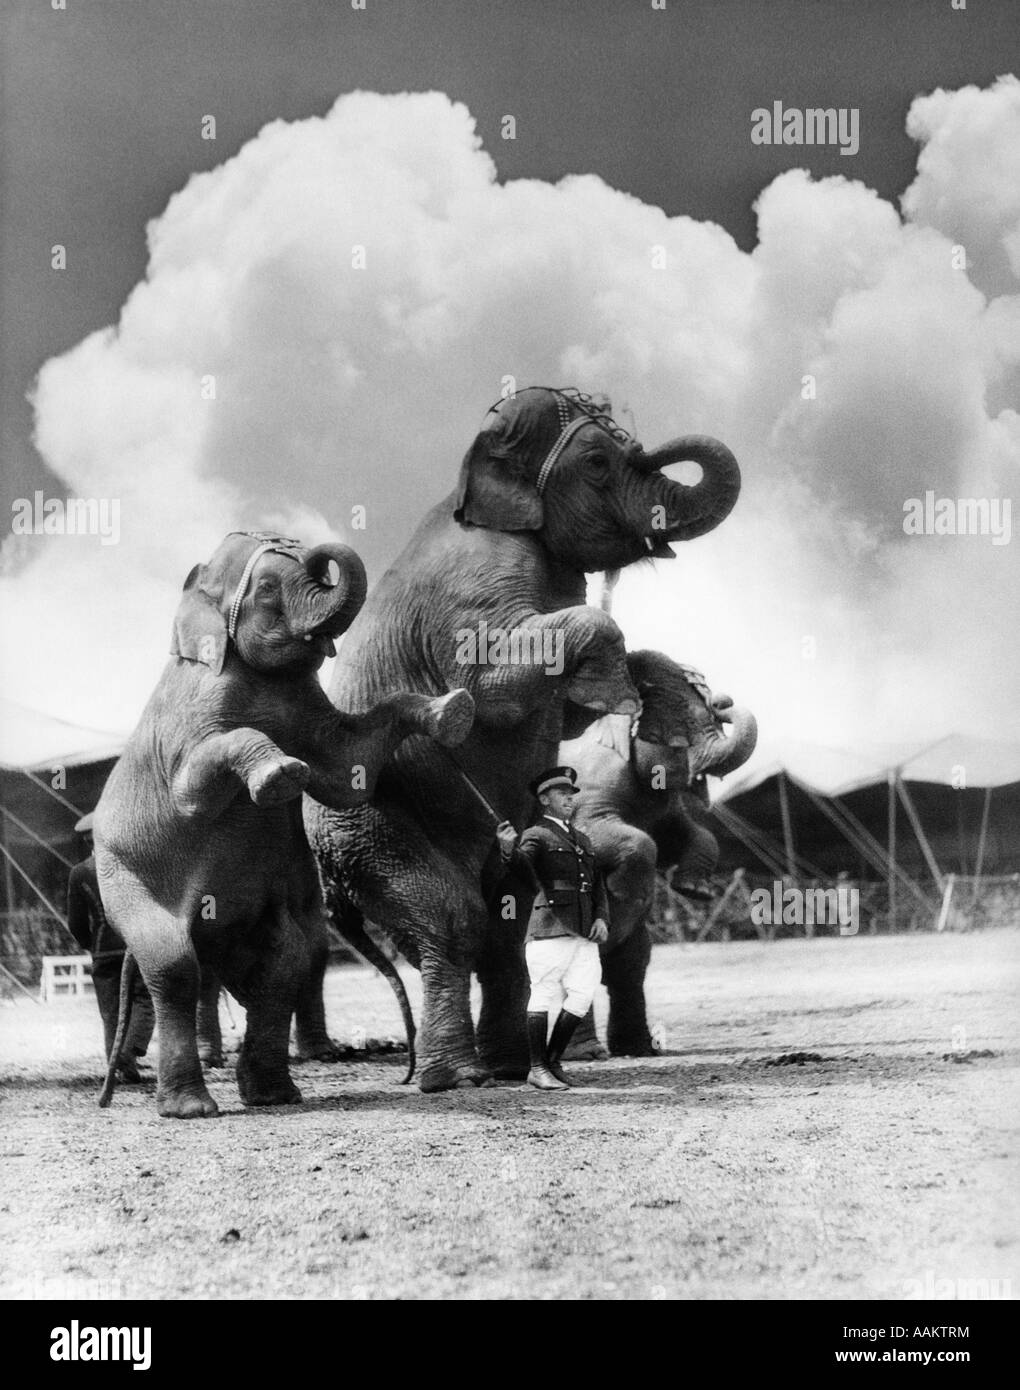 1930s CIRCUS TRAINER IN FRONT OF 3 ELEPHANTS Elephas maximus indicus STANDING ON HIND LEGS Stock Photo